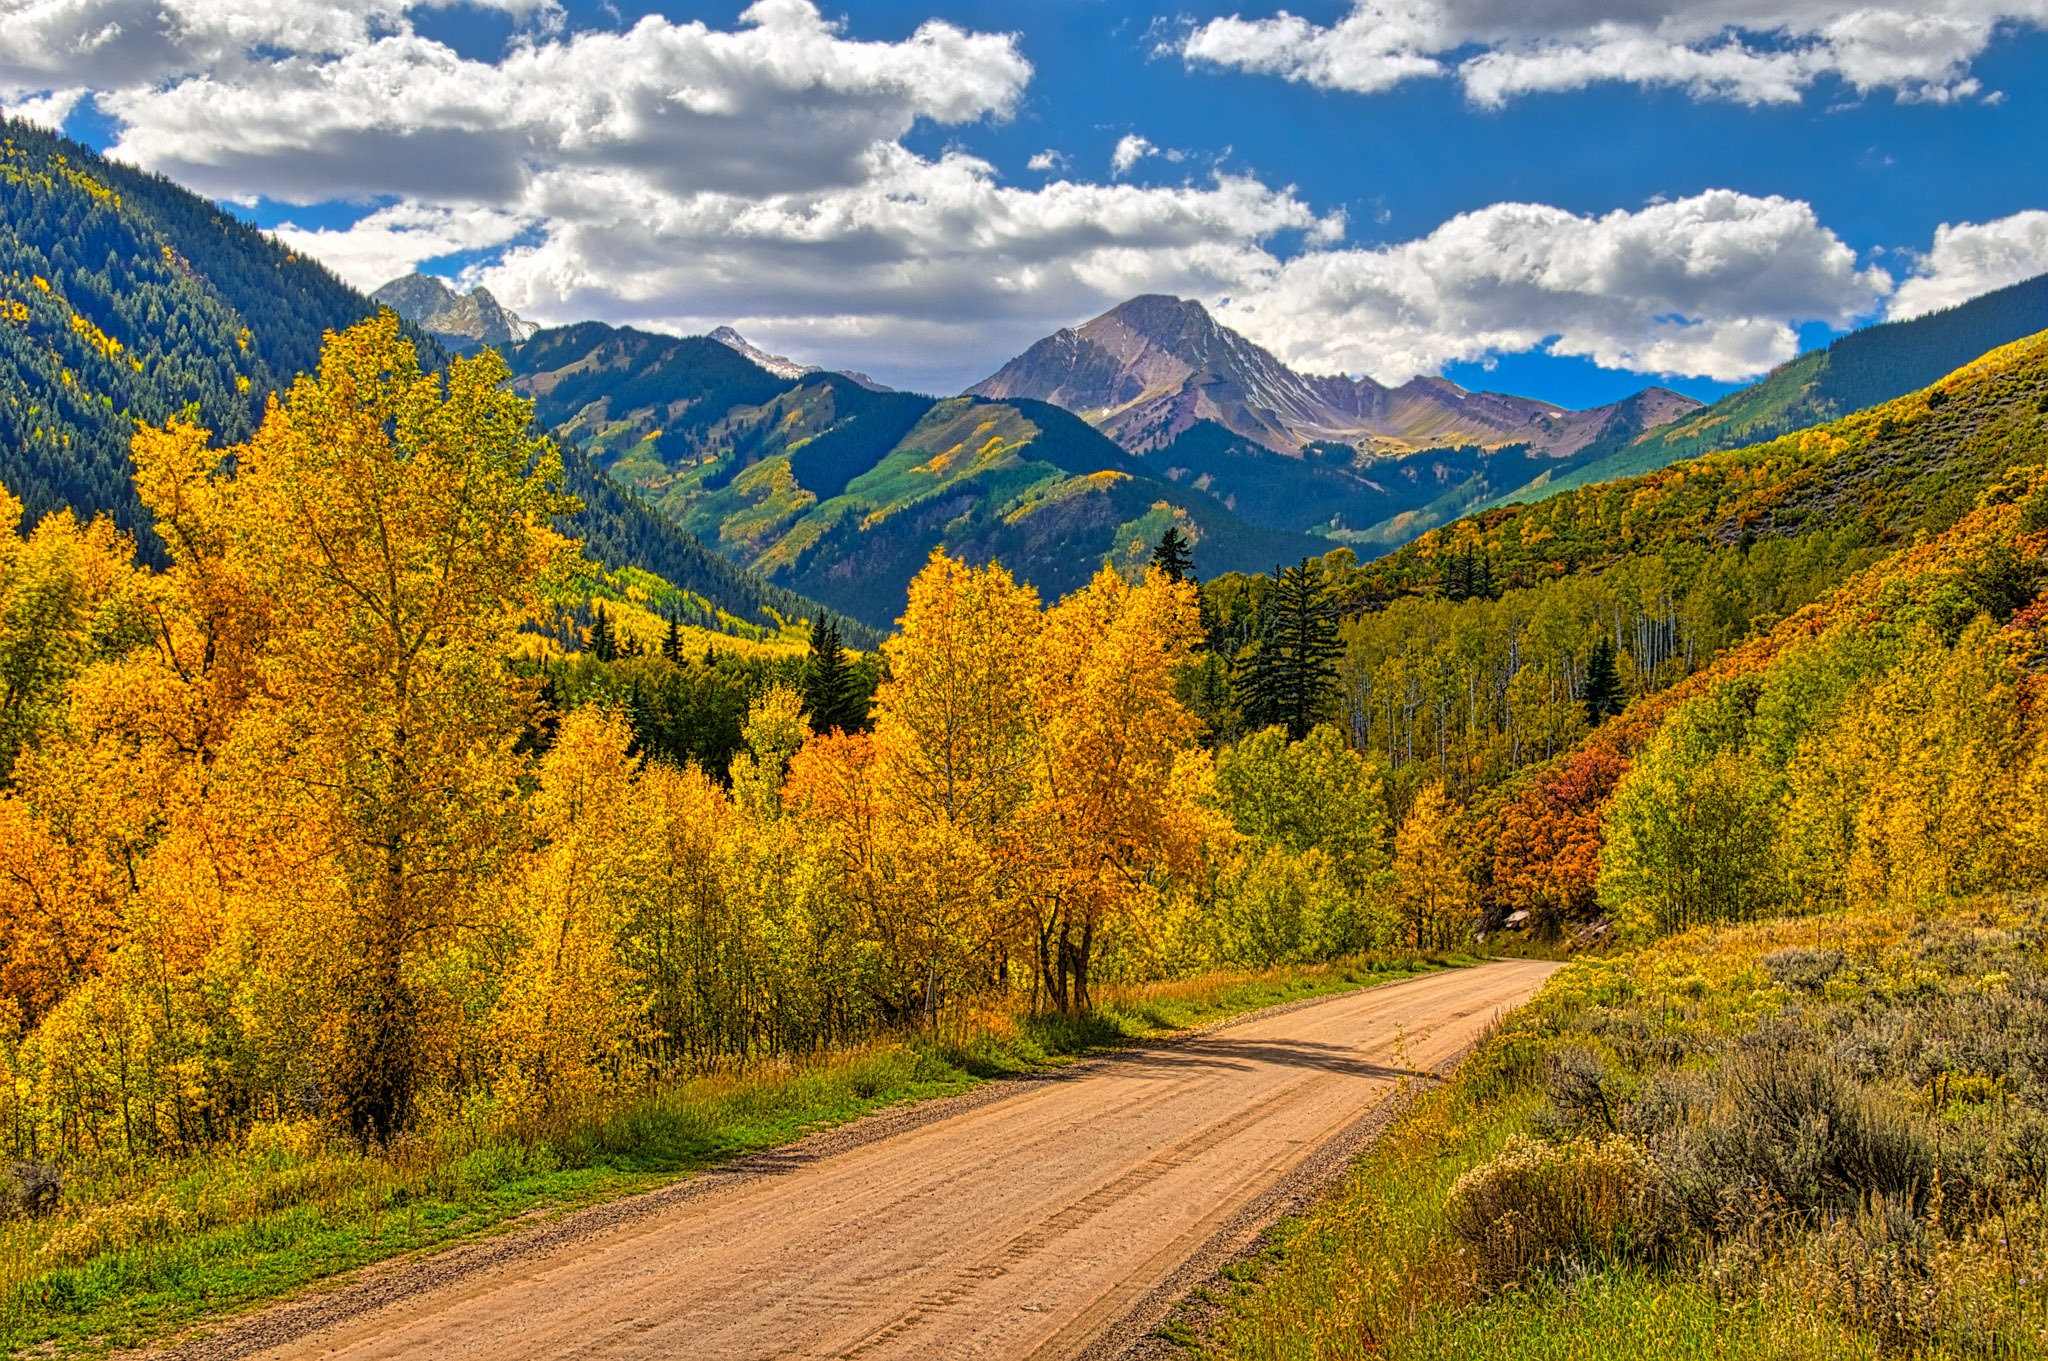 A nice view of Snowmass Mountain from Snowmass Creek Road near Aspen, Colorado.